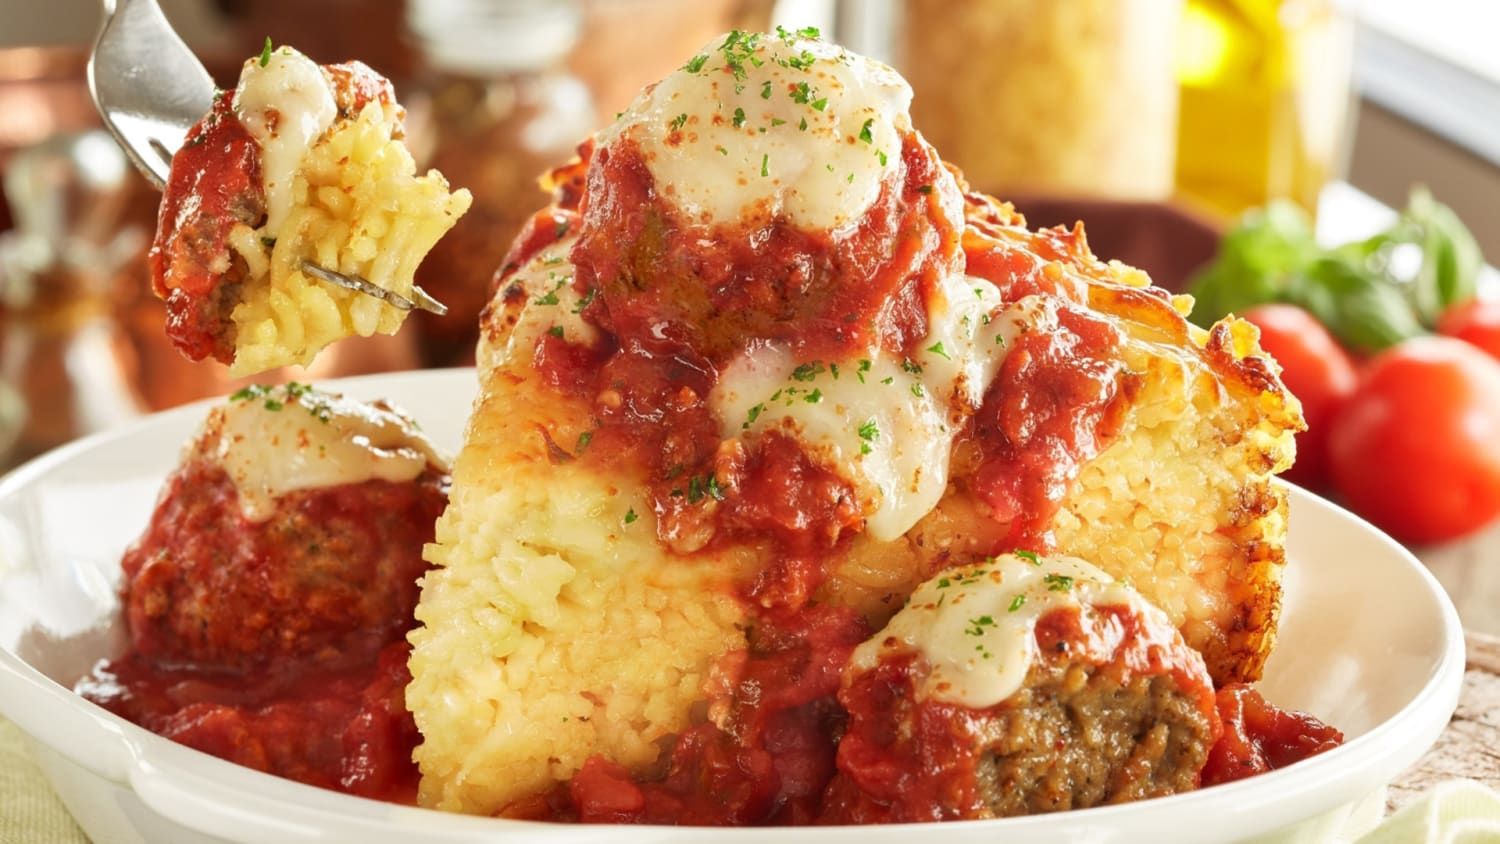 Olive Garden adds spaghetti pies, new breadstick sandwiches to menu